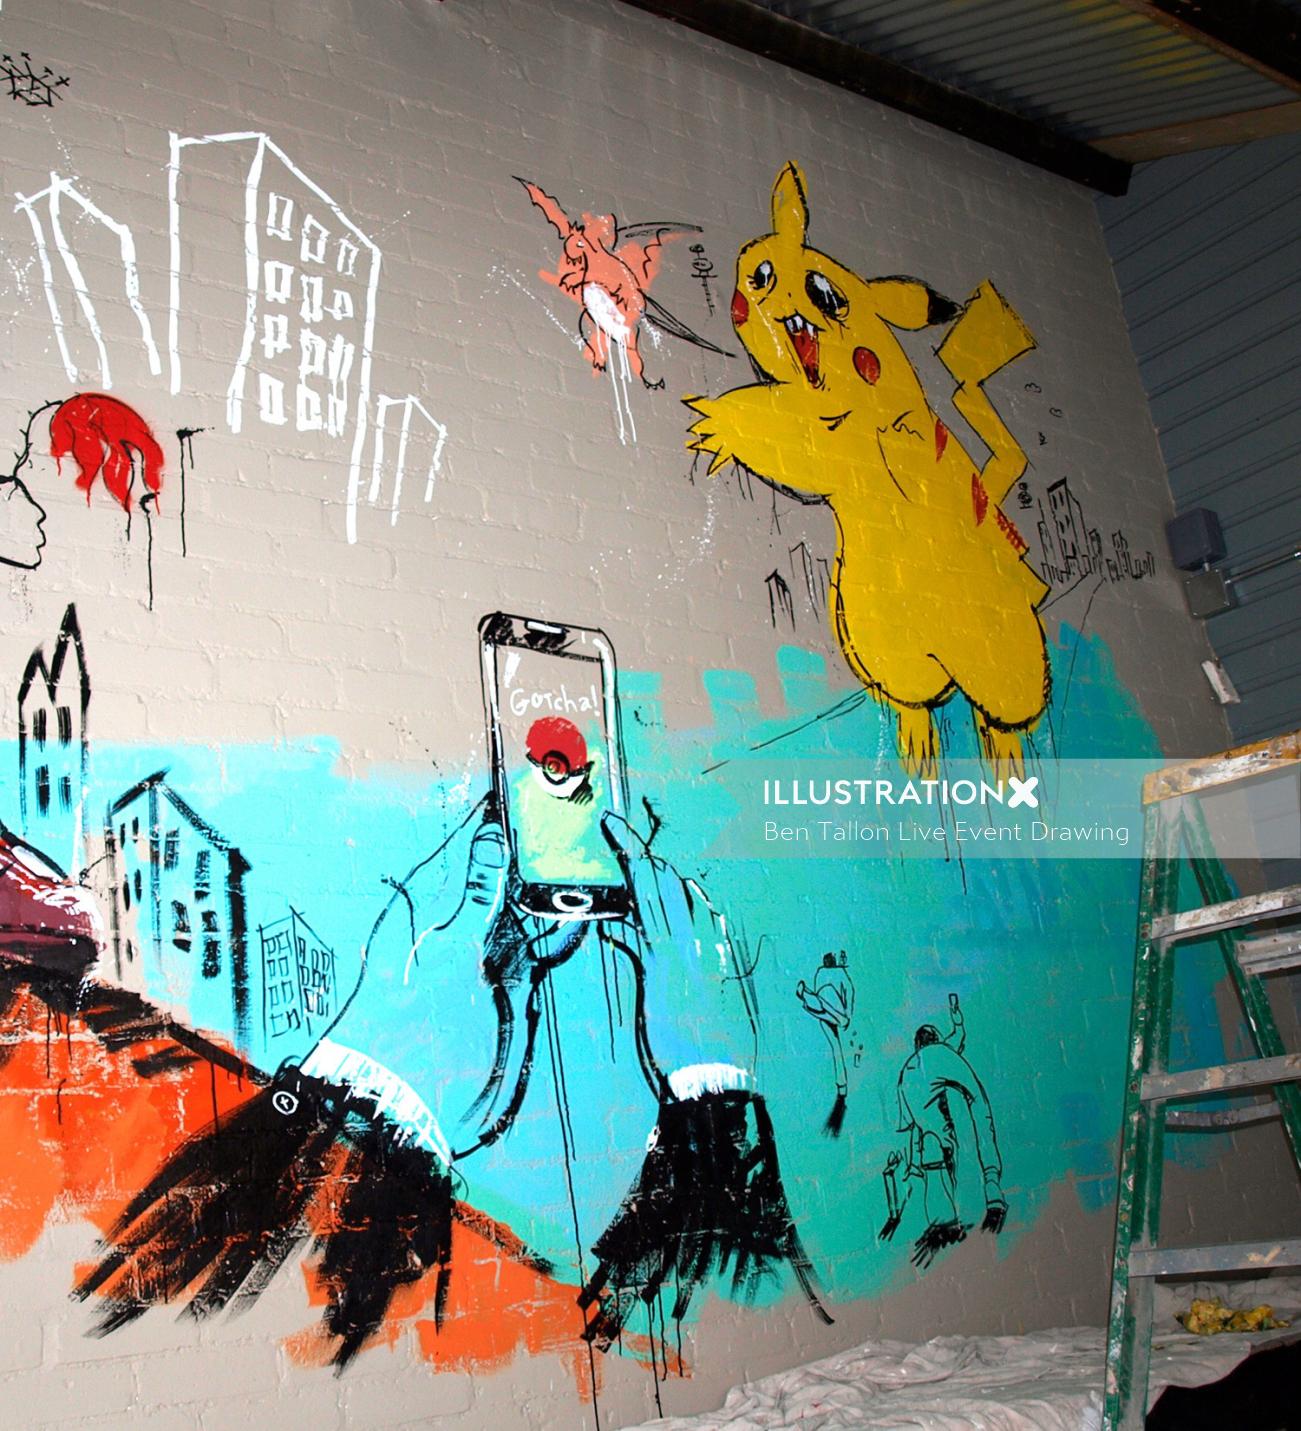 Live event drawing picachoo on wall
